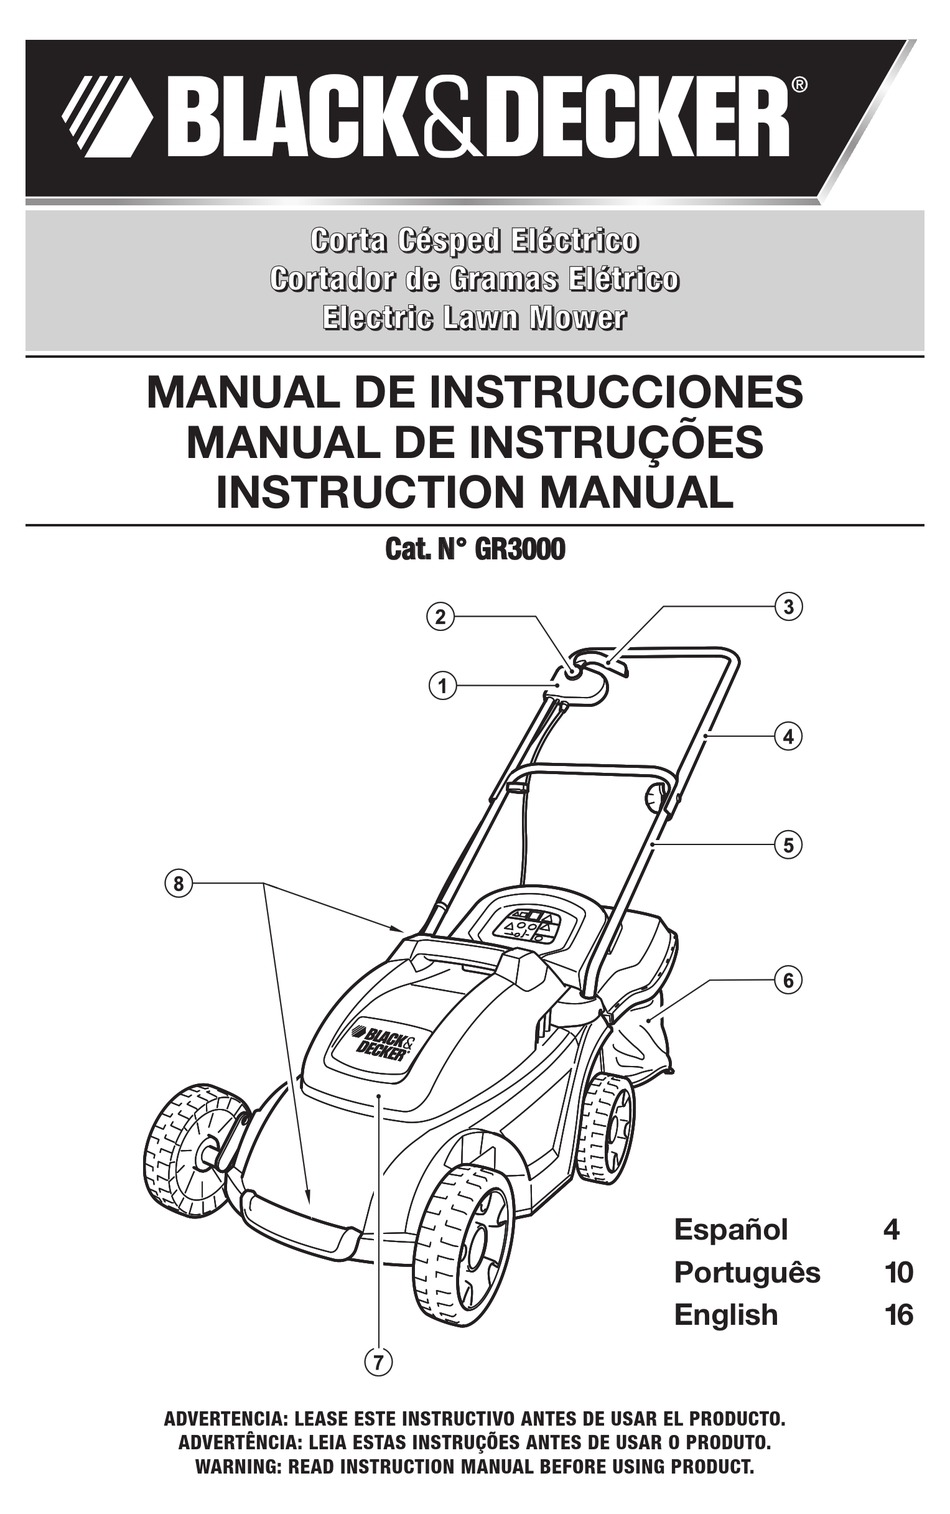 User manual Black & Decker GR3000 (English - 20 pages)